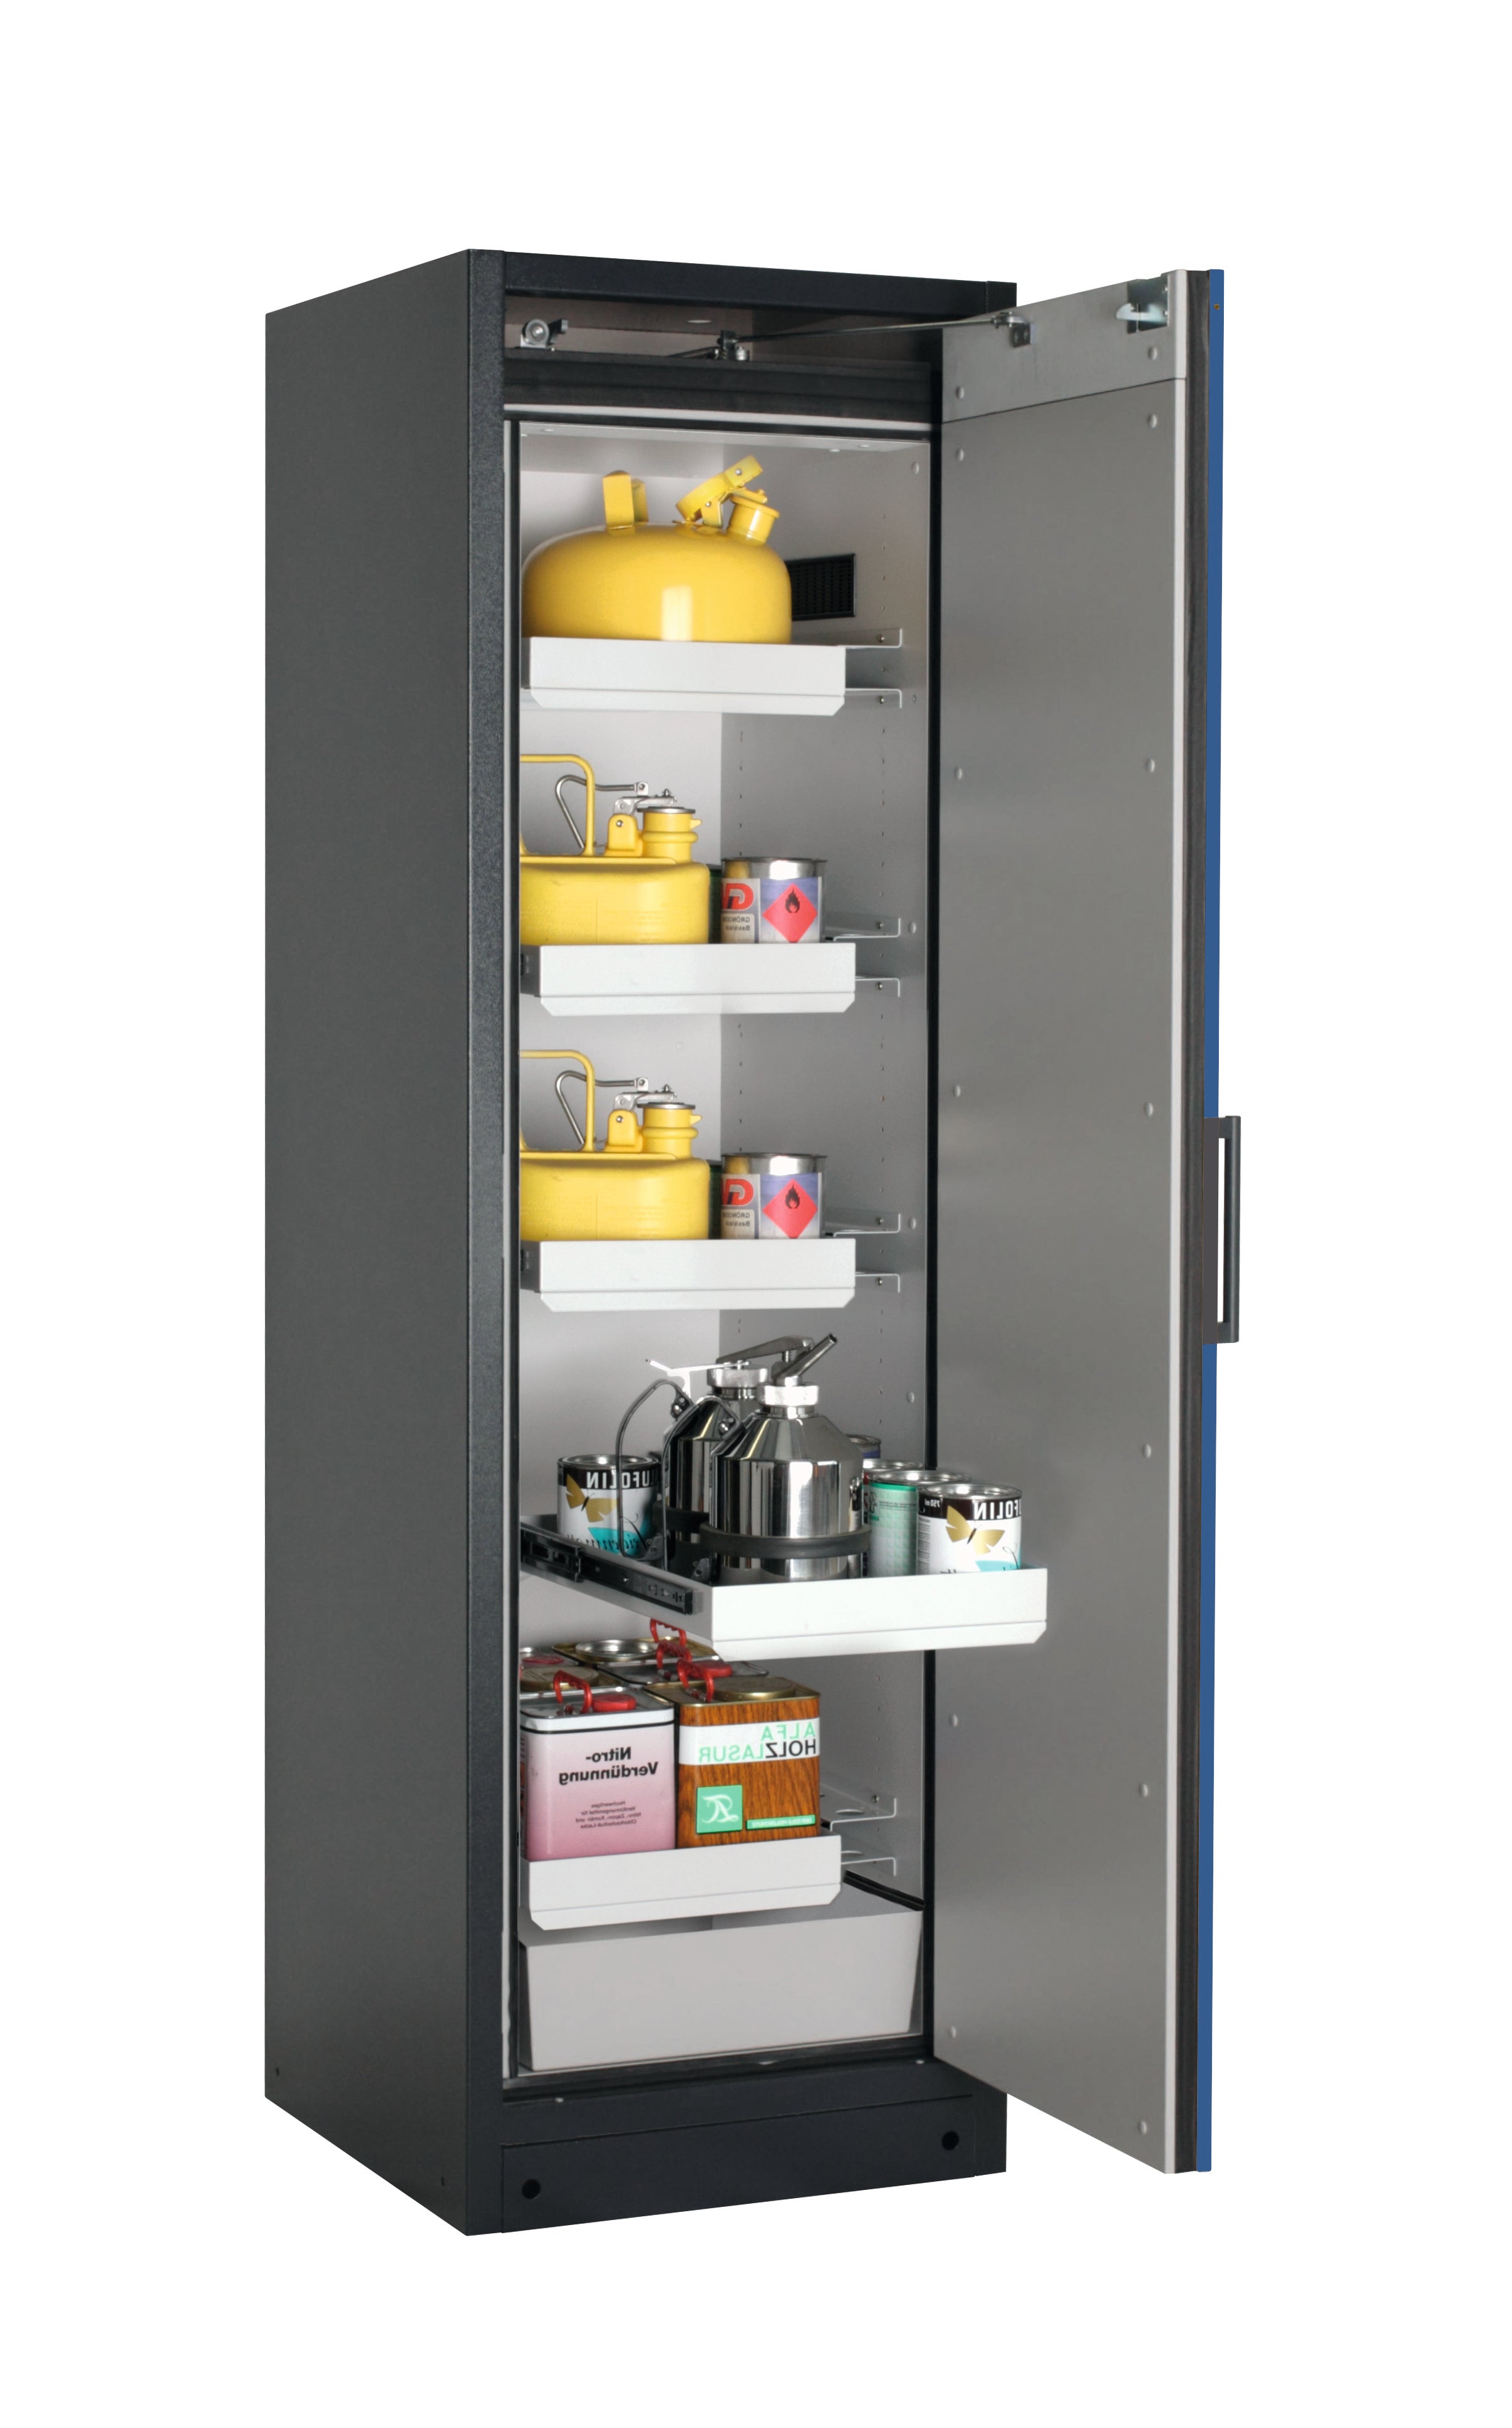 Type 90 safety storage cabinet Q-PEGASUS-90 model Q90.195.060.WDACR in gentian blue RAL 5010 with 4x drawer (standard) (sheet steel),